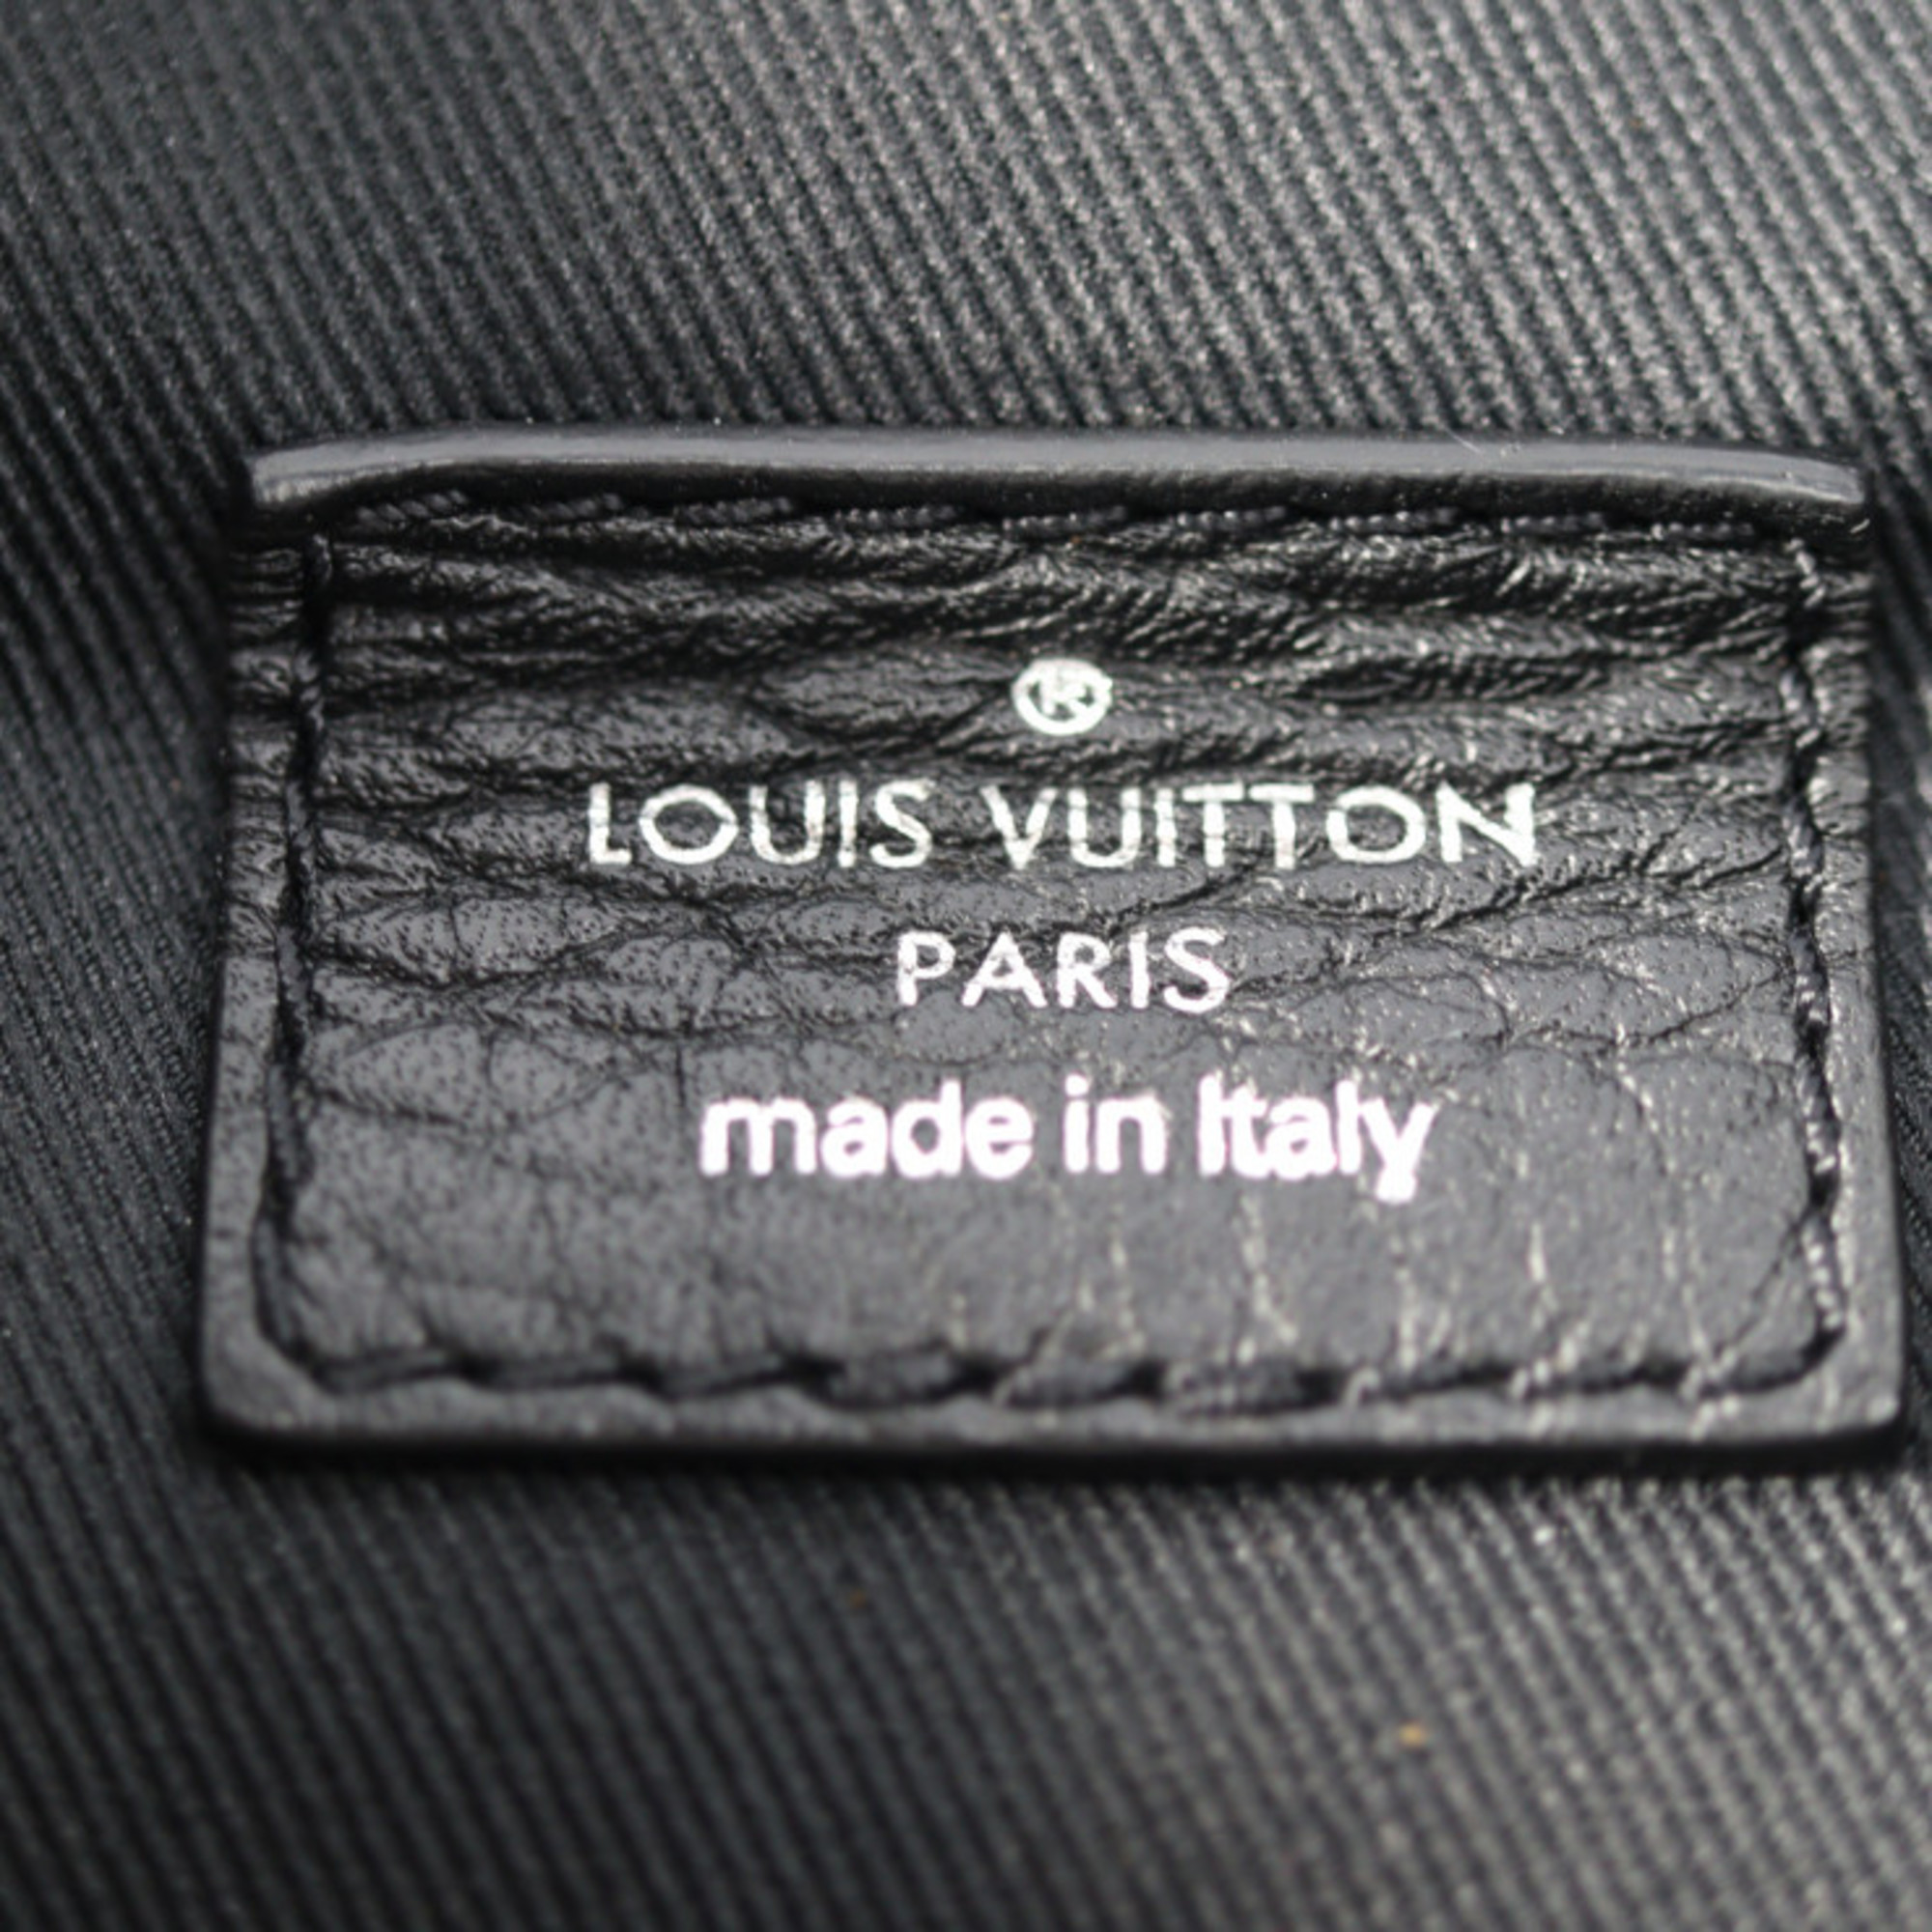 LOUIS VUITTON Louis Vuitton cover light tote bag M55000 Taurillon leather black silver metal fittings with pouch